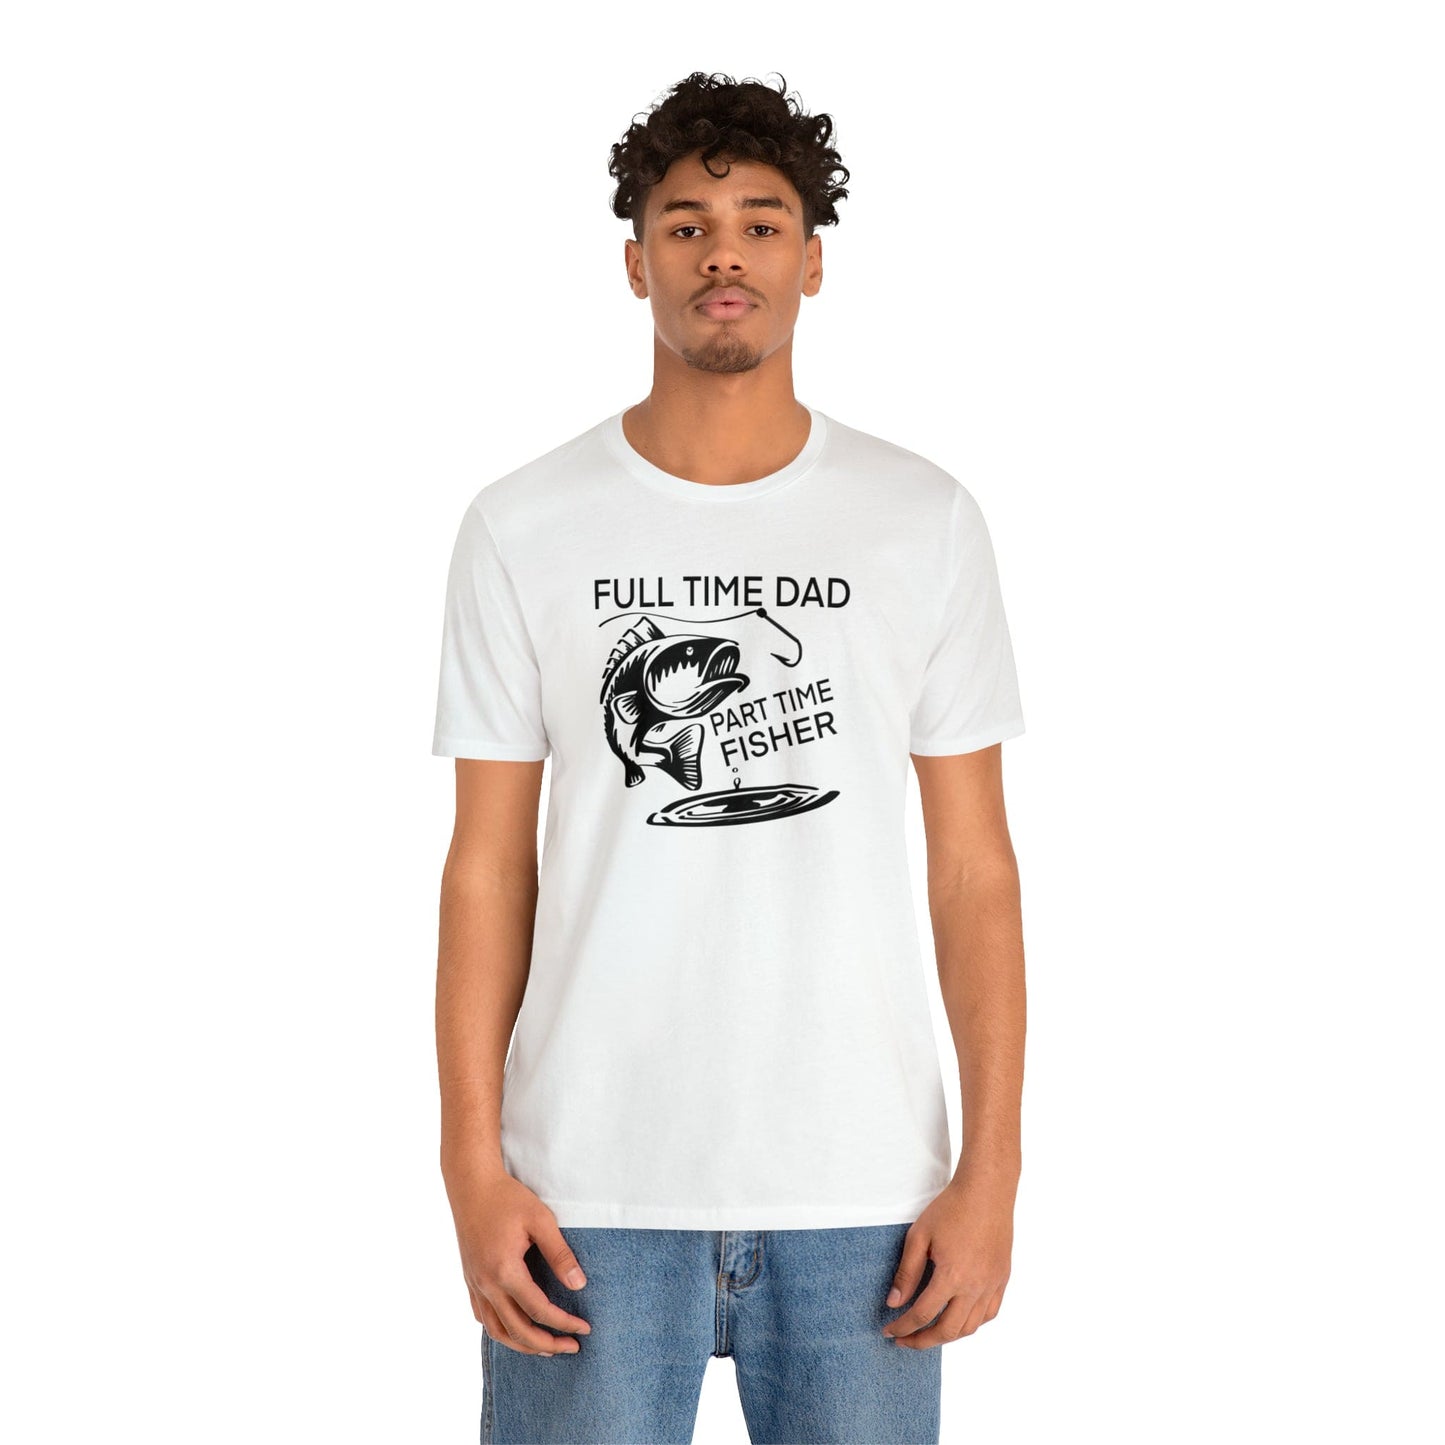 Full Time Dad Part Time Fisher - Father's Day T-Shirt